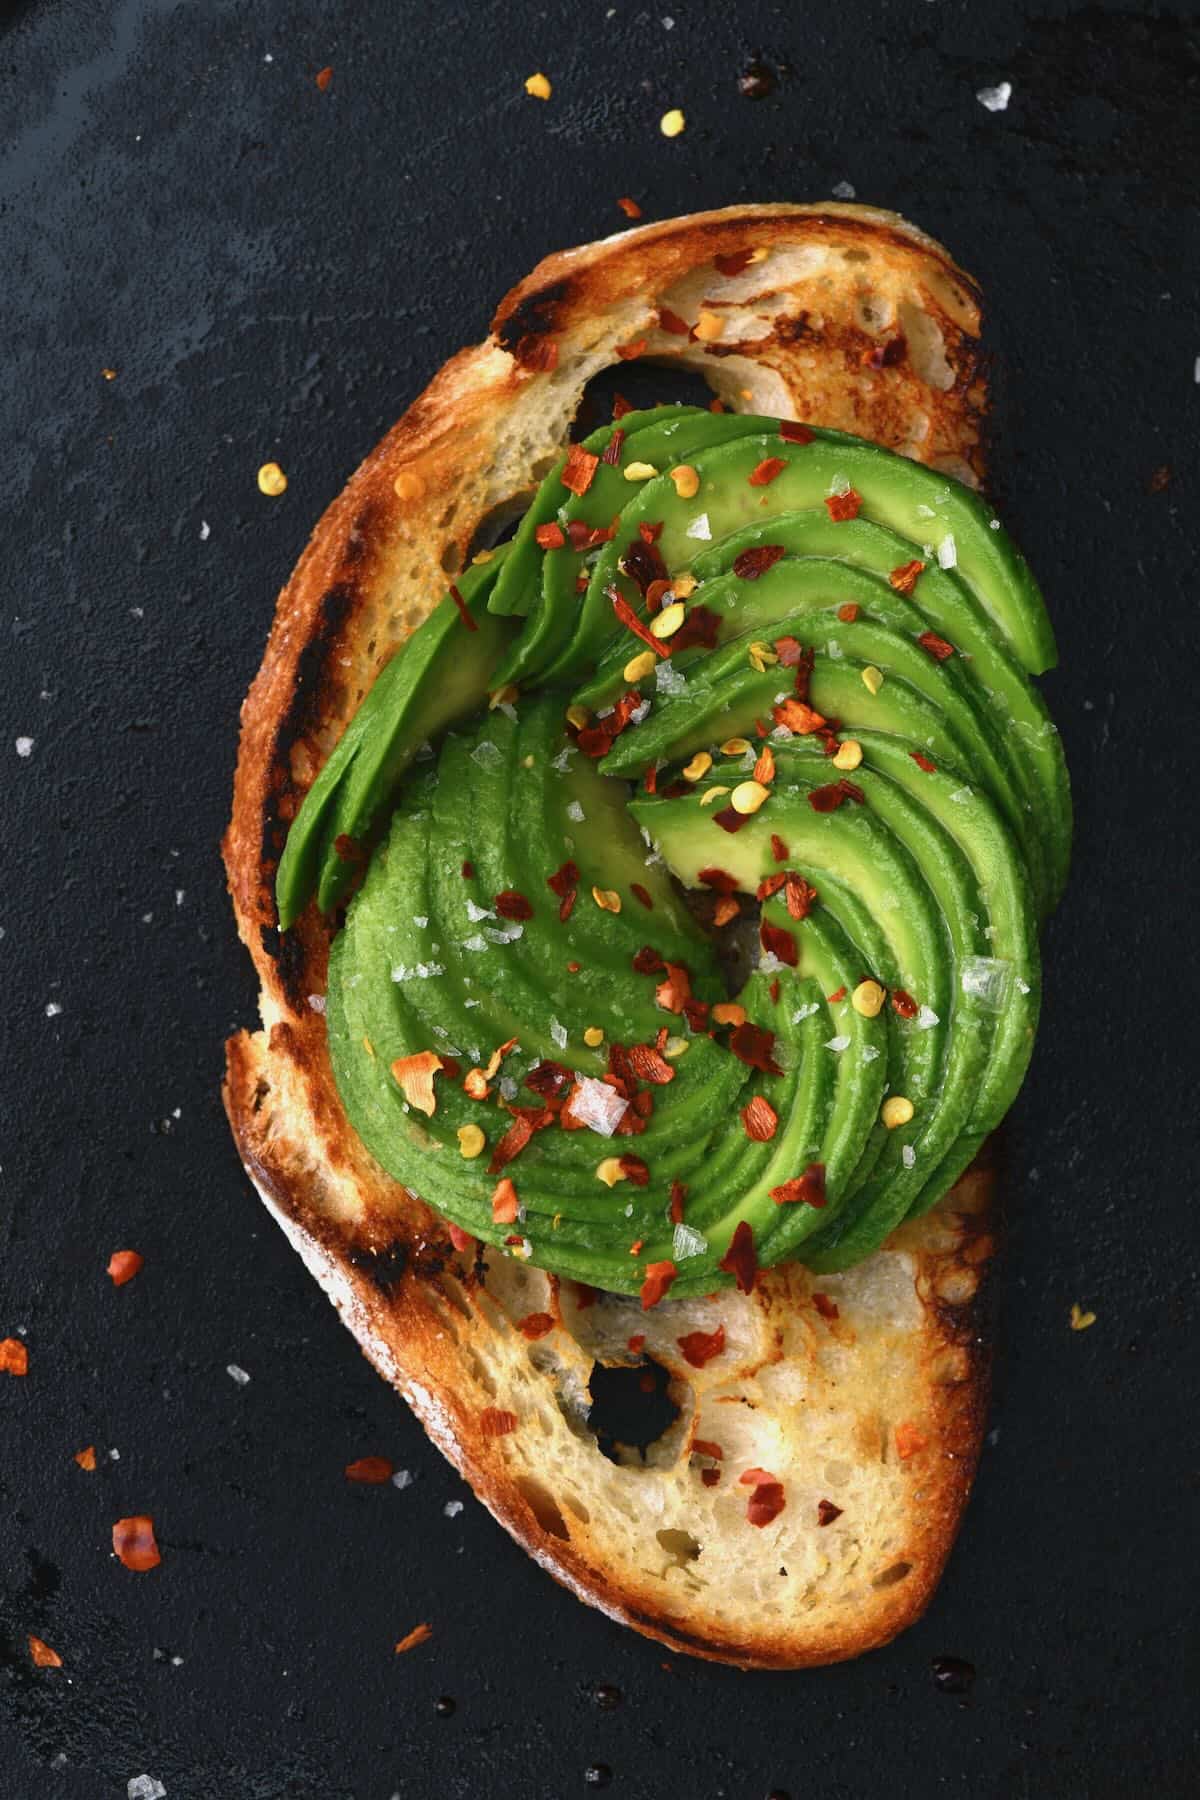 Avocado rosette over a slice of toasted bread